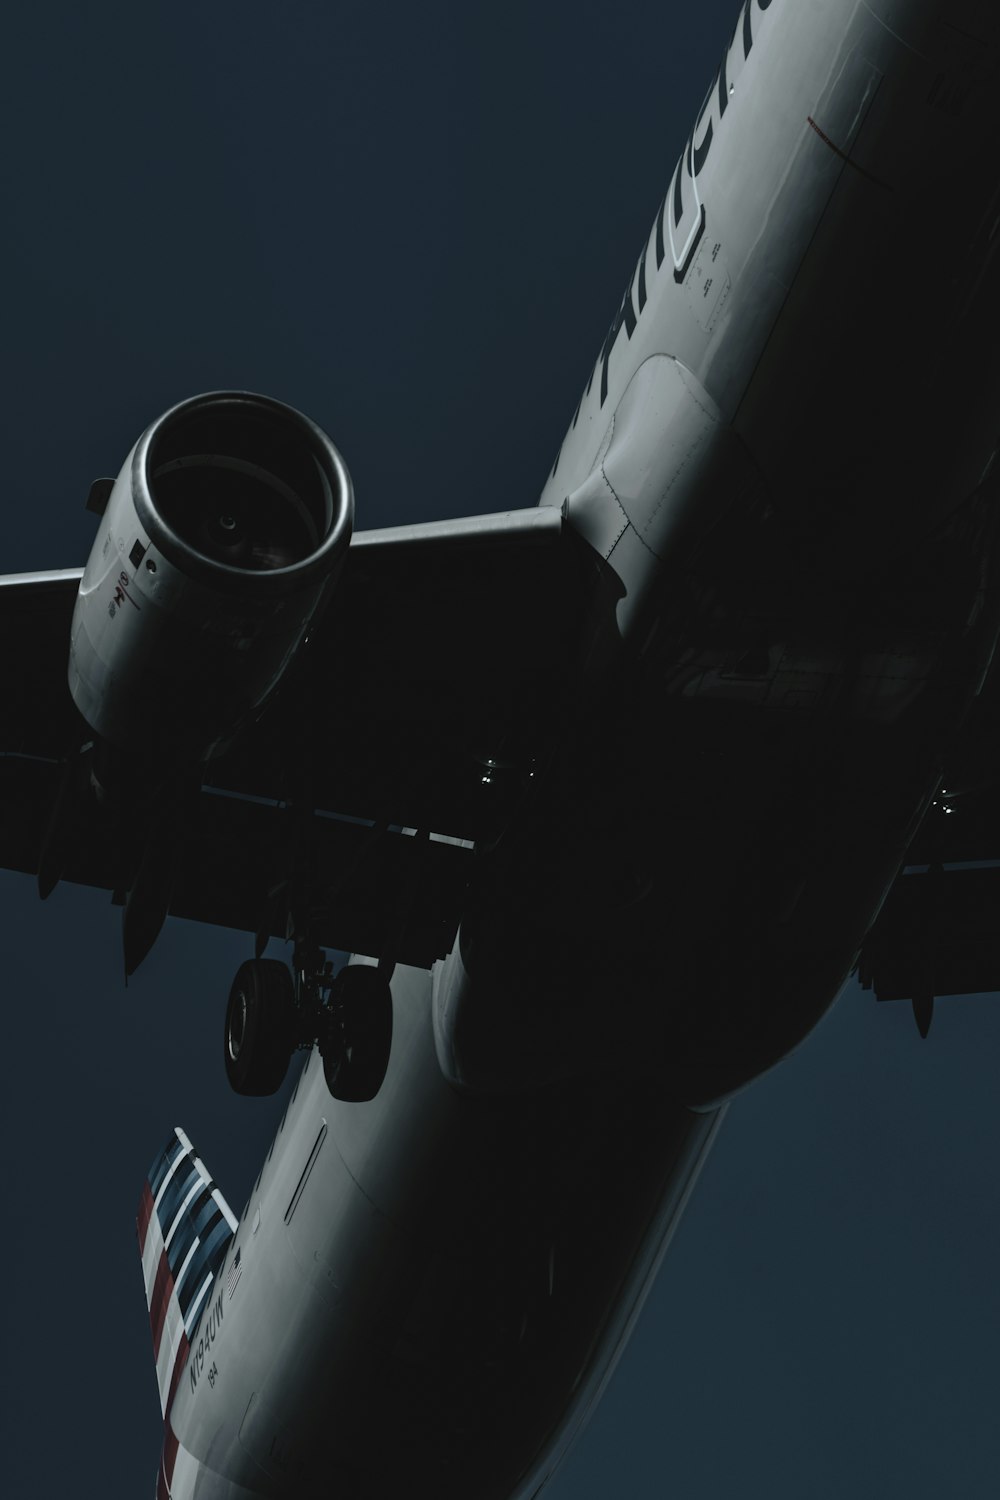 shallow focus photo of gray airplane